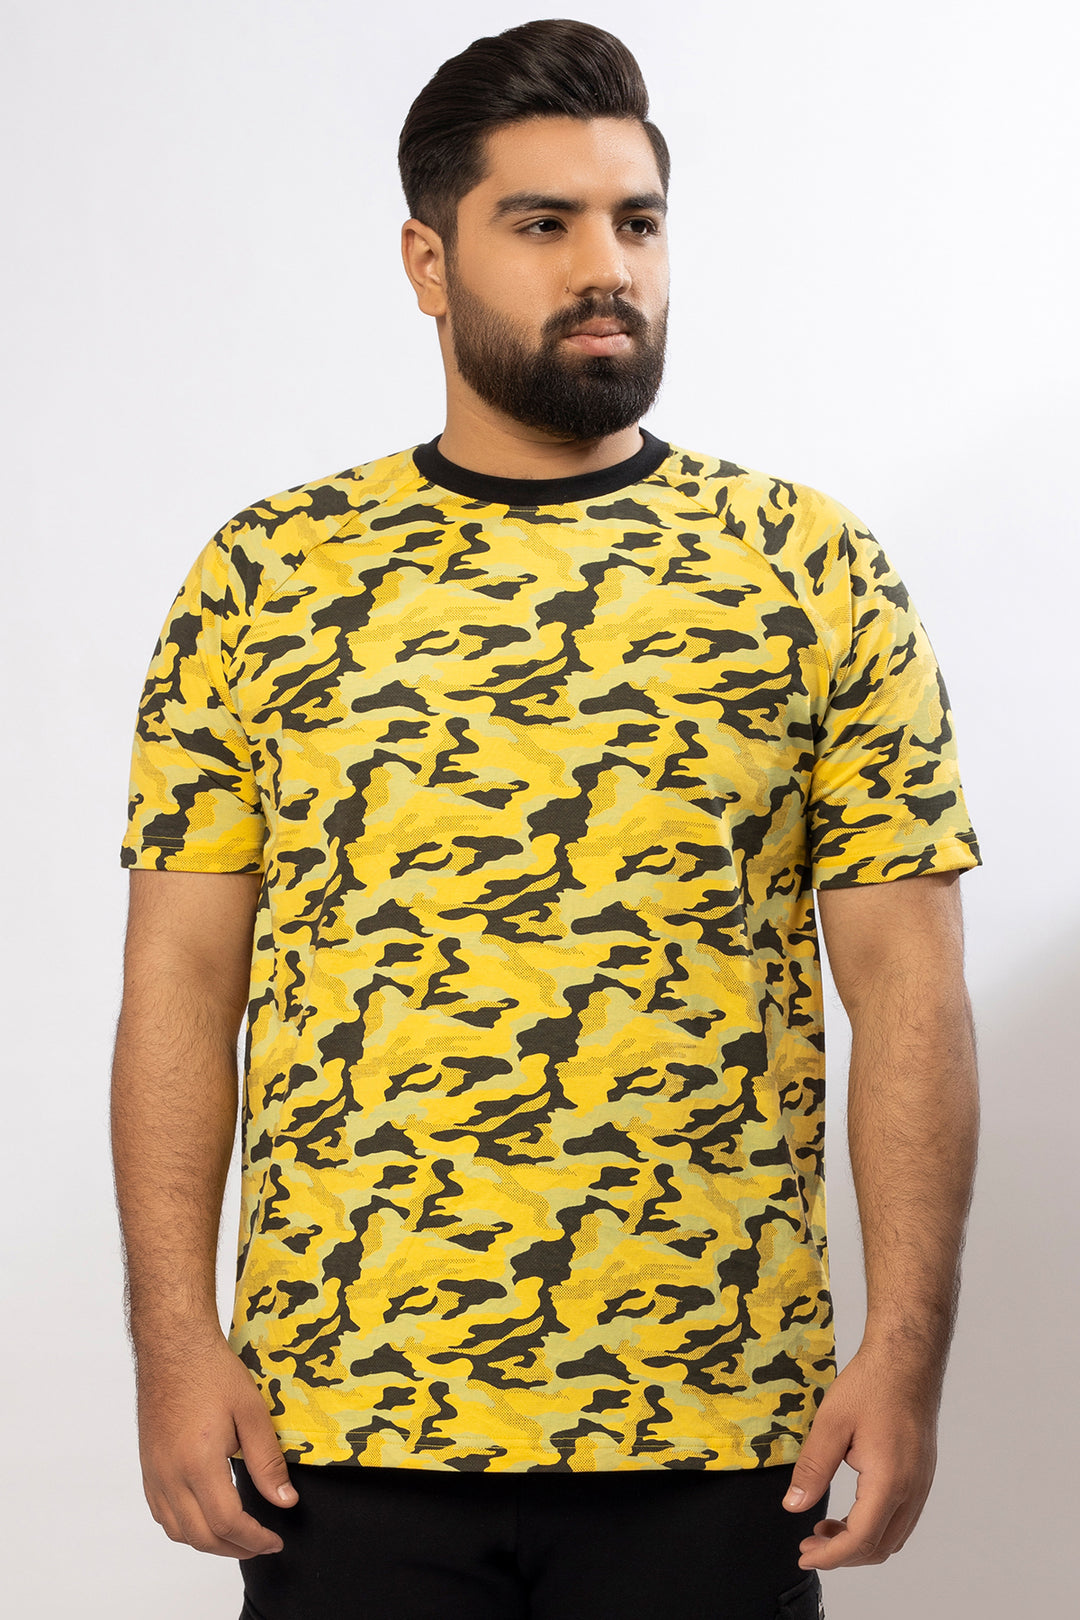 Yellow Camo Printed T-Shirt (Plus Size) - A24 - MT0325P